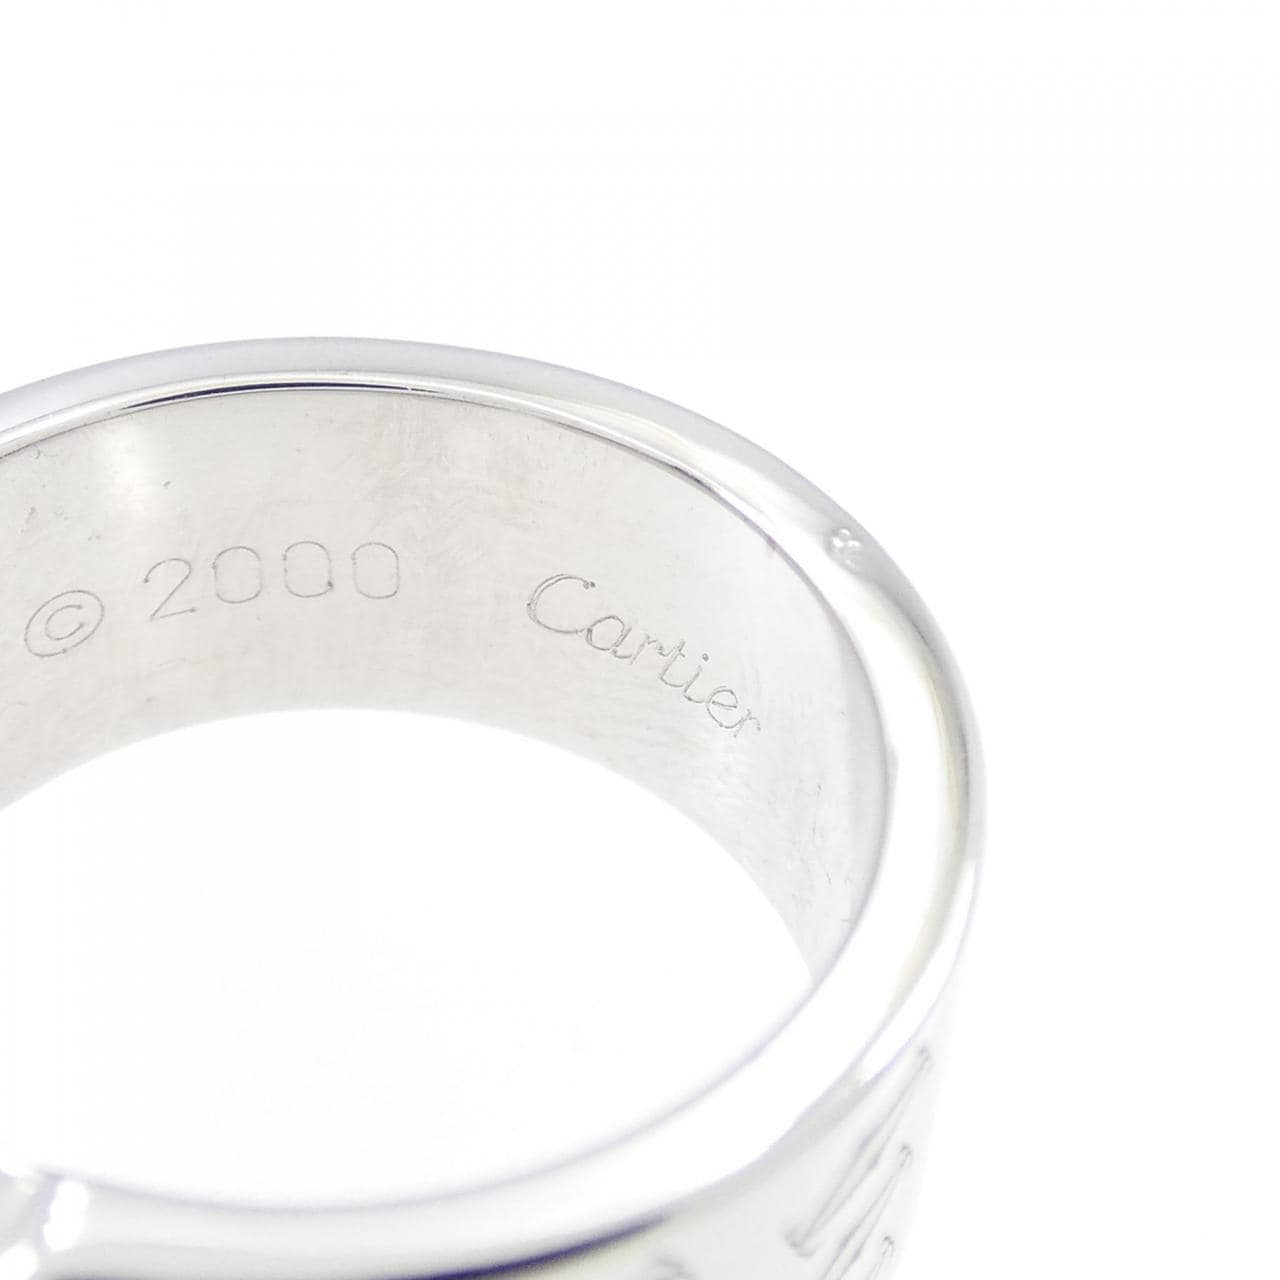 Cartier C2 2000 X'mas limited ring